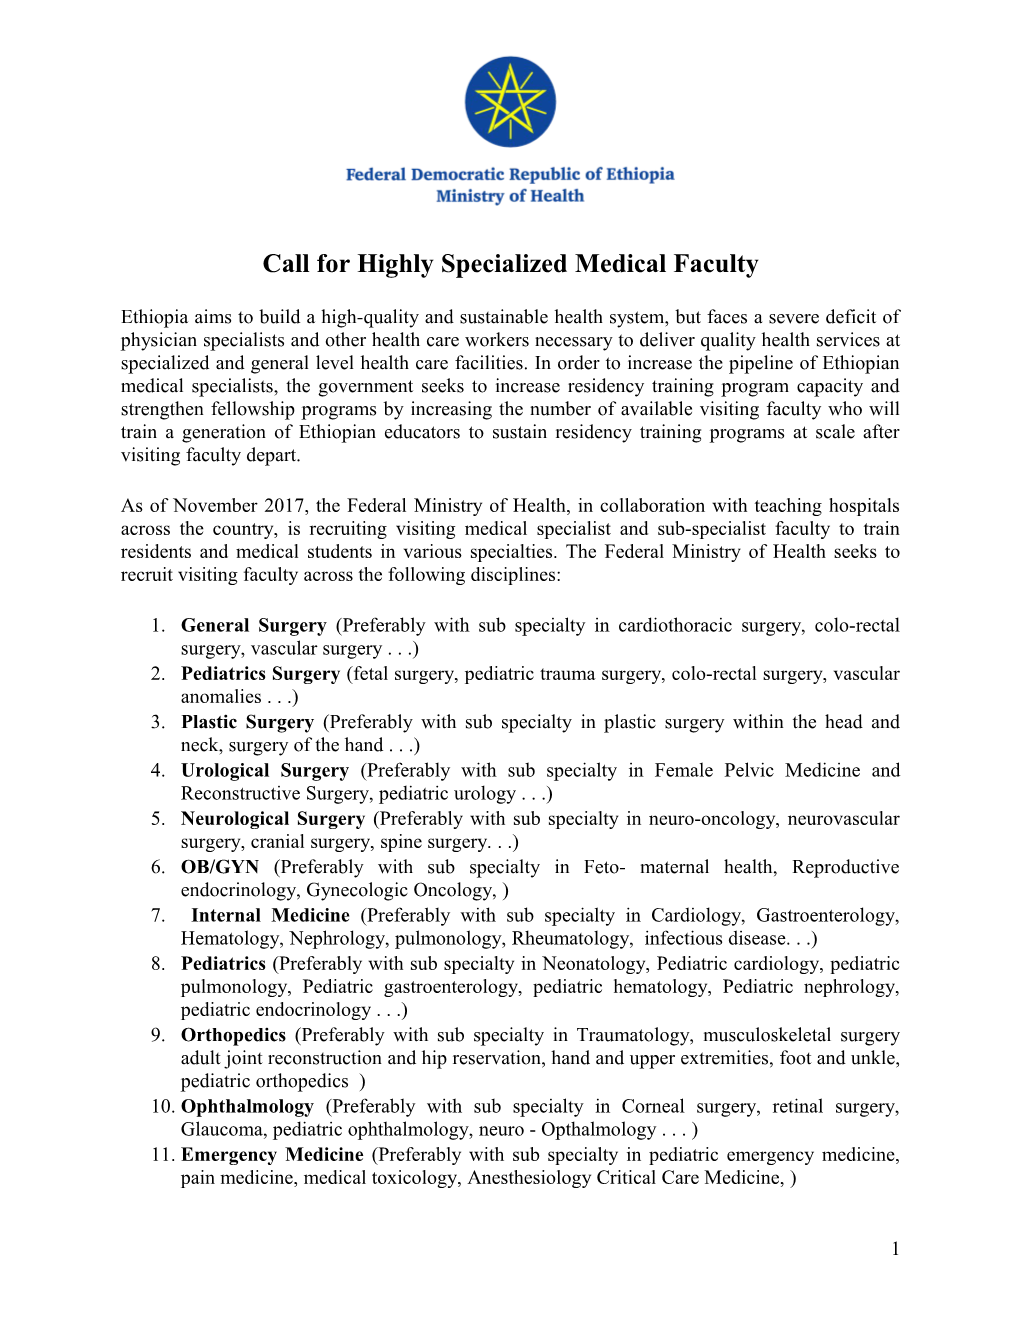 Call for Highly Specialized Medical Faculty